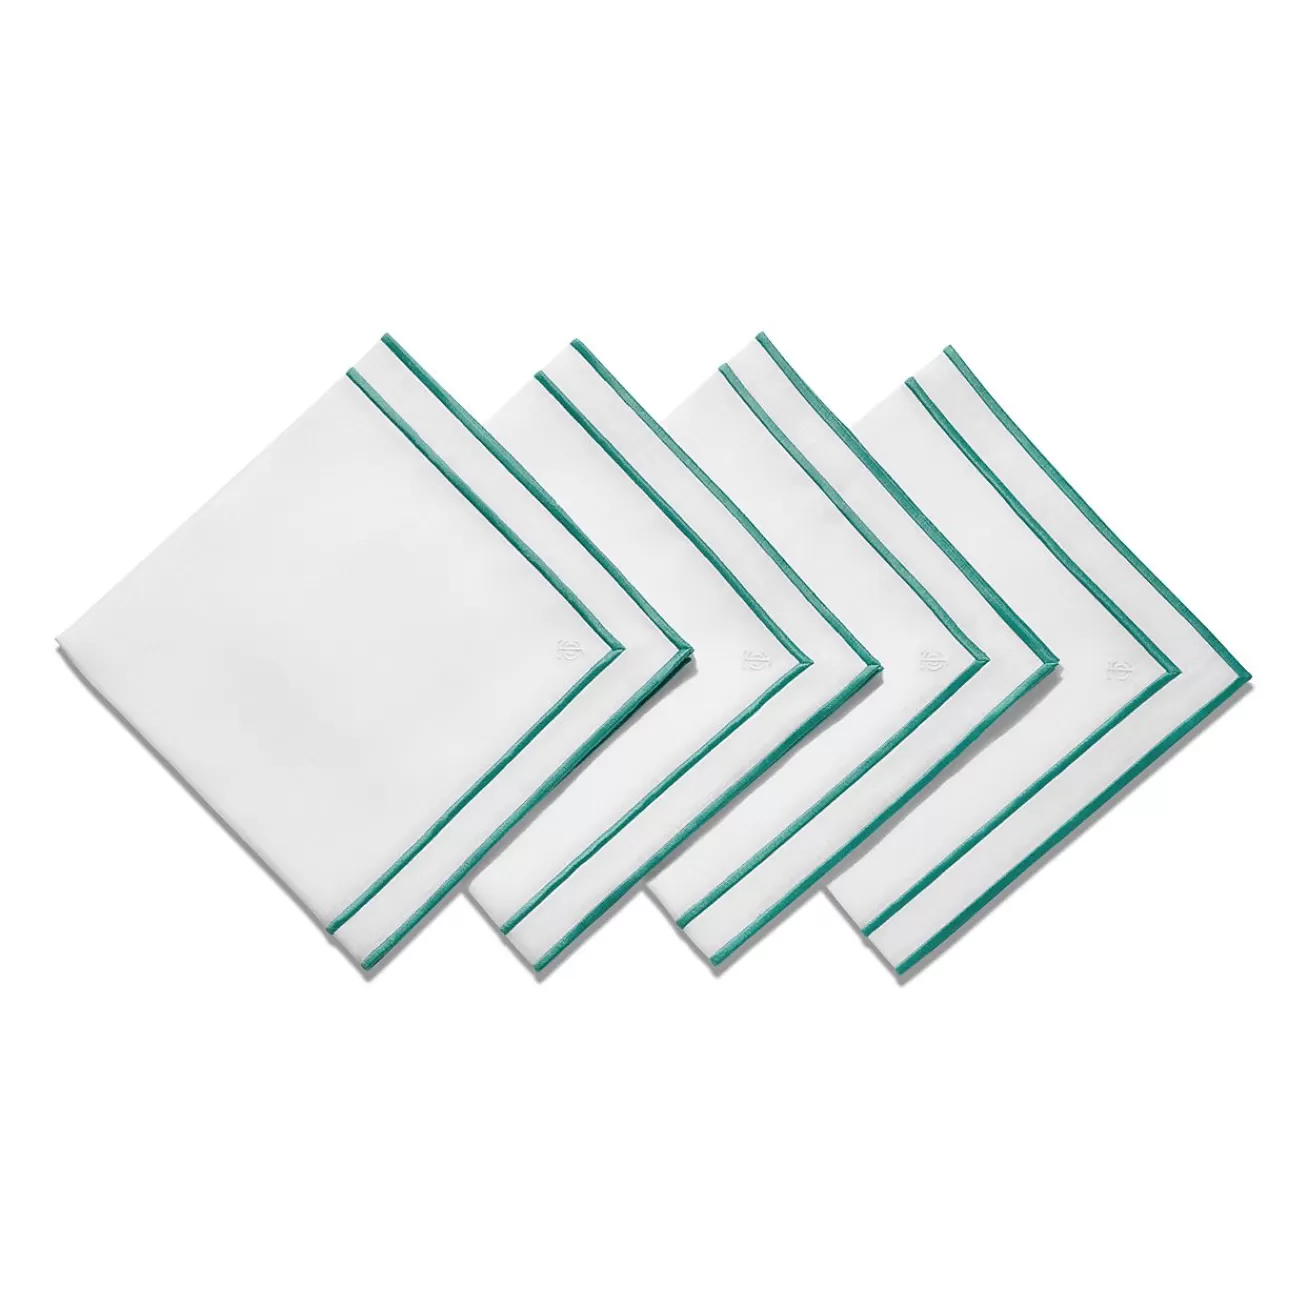 Tiffany & Co. Tiffany Home Essentials Embroidered Napkins in Linen, Set of Four | ^ Tiffany Blue® Gifts | Wedding Gifts